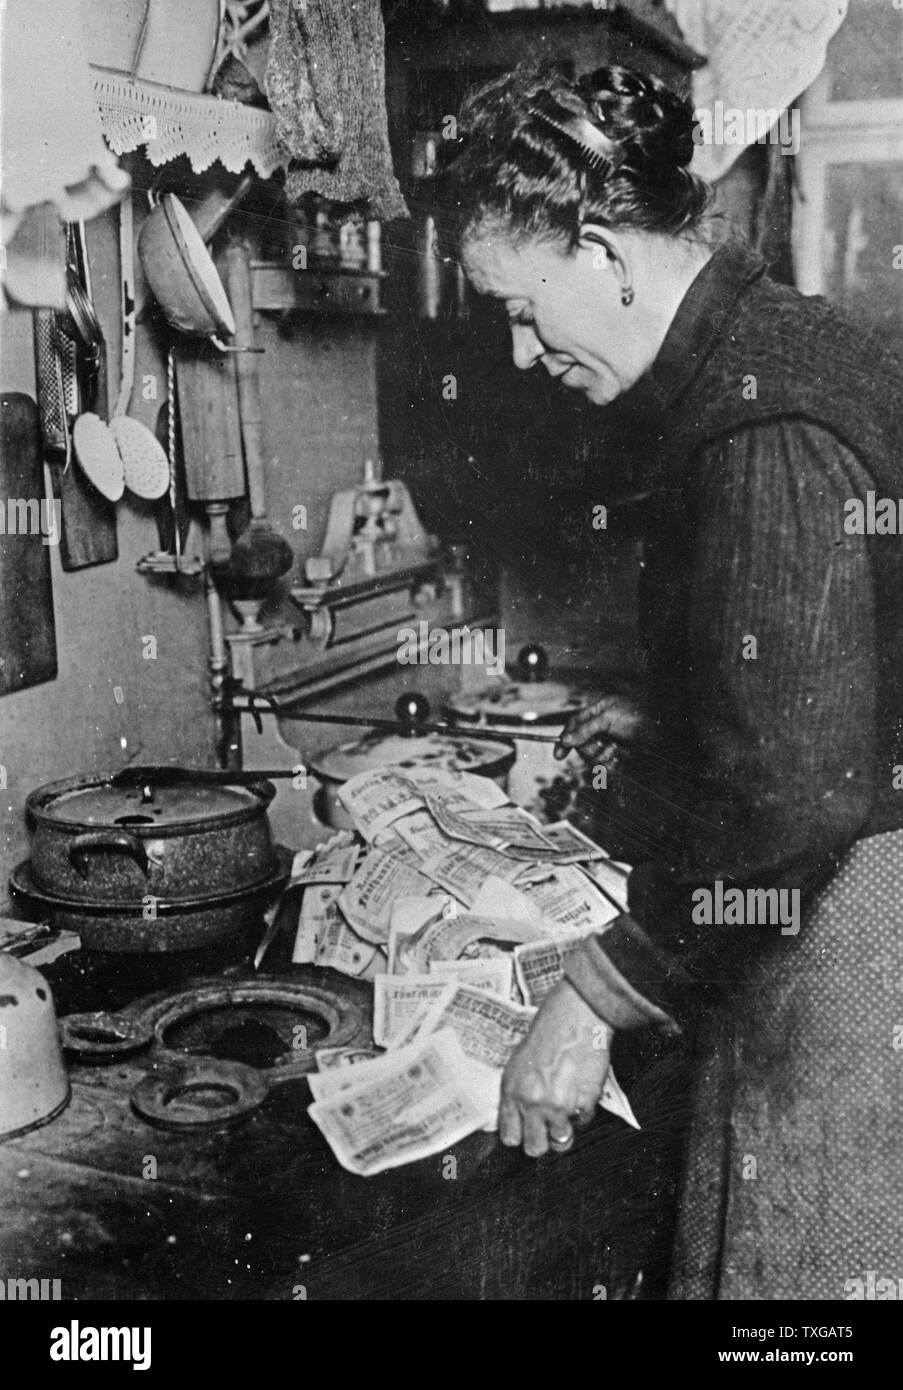 Inflation. In Germany after the last war, it was possible to pay 50 million dollars for a nickel cup of coffee, and 35 million dollars for a $35 suit of clothes. This Berlin woman, realizing that fuel costs money, is starting the morning fire with marks not worth the paper they are printed on Stock Photo